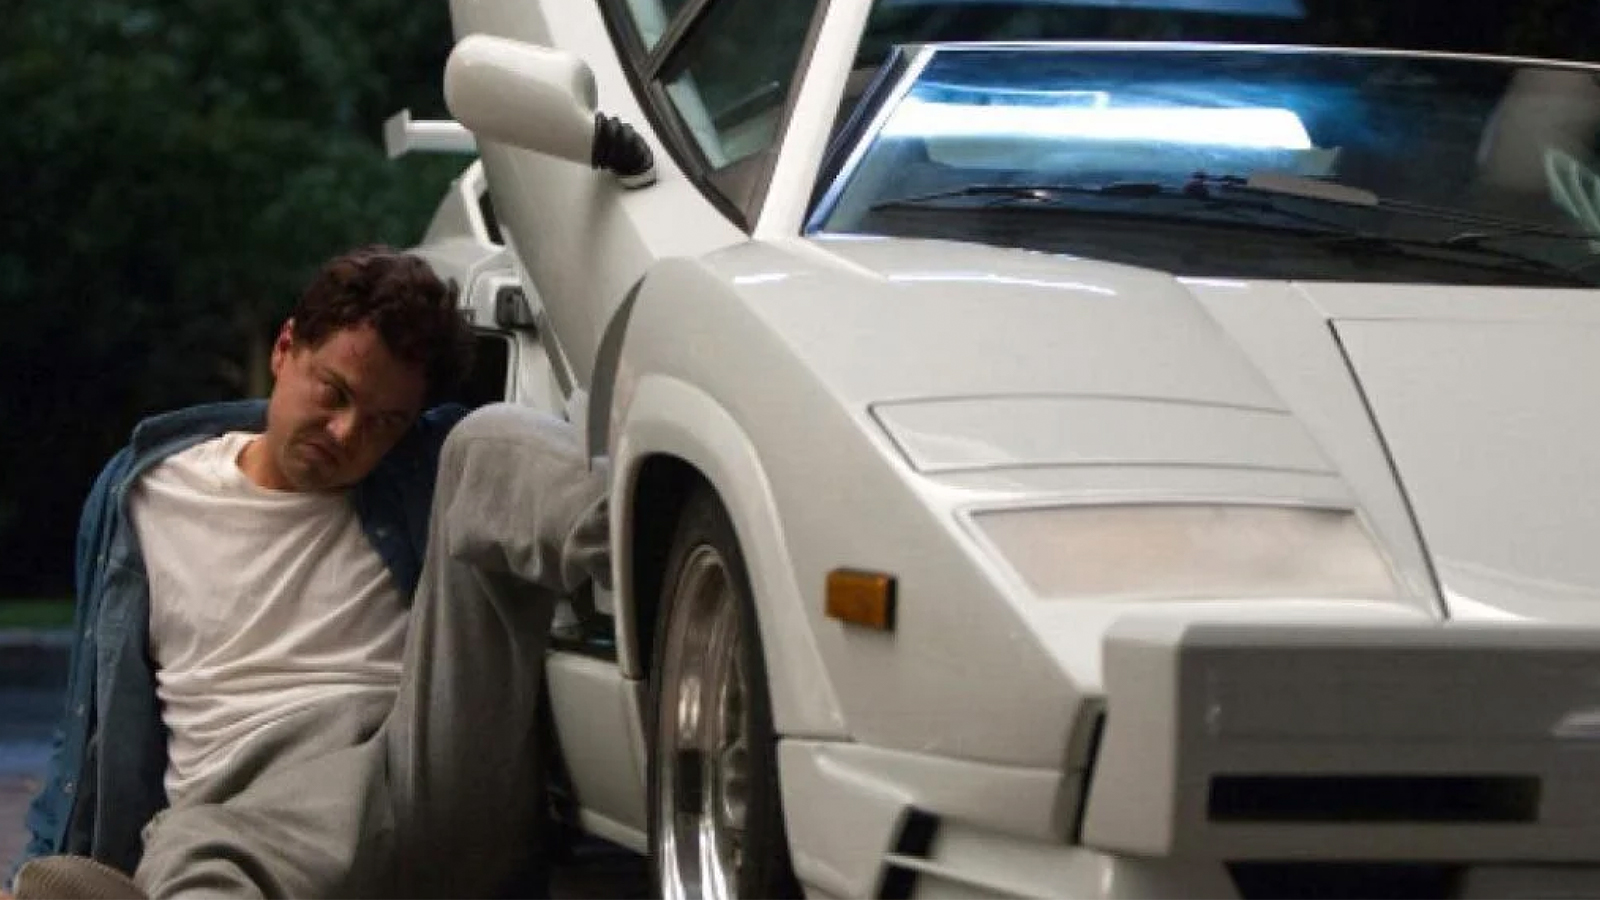 The Wrecked 'Wolf of Wall Street' Lamborghini Countach Is Up for